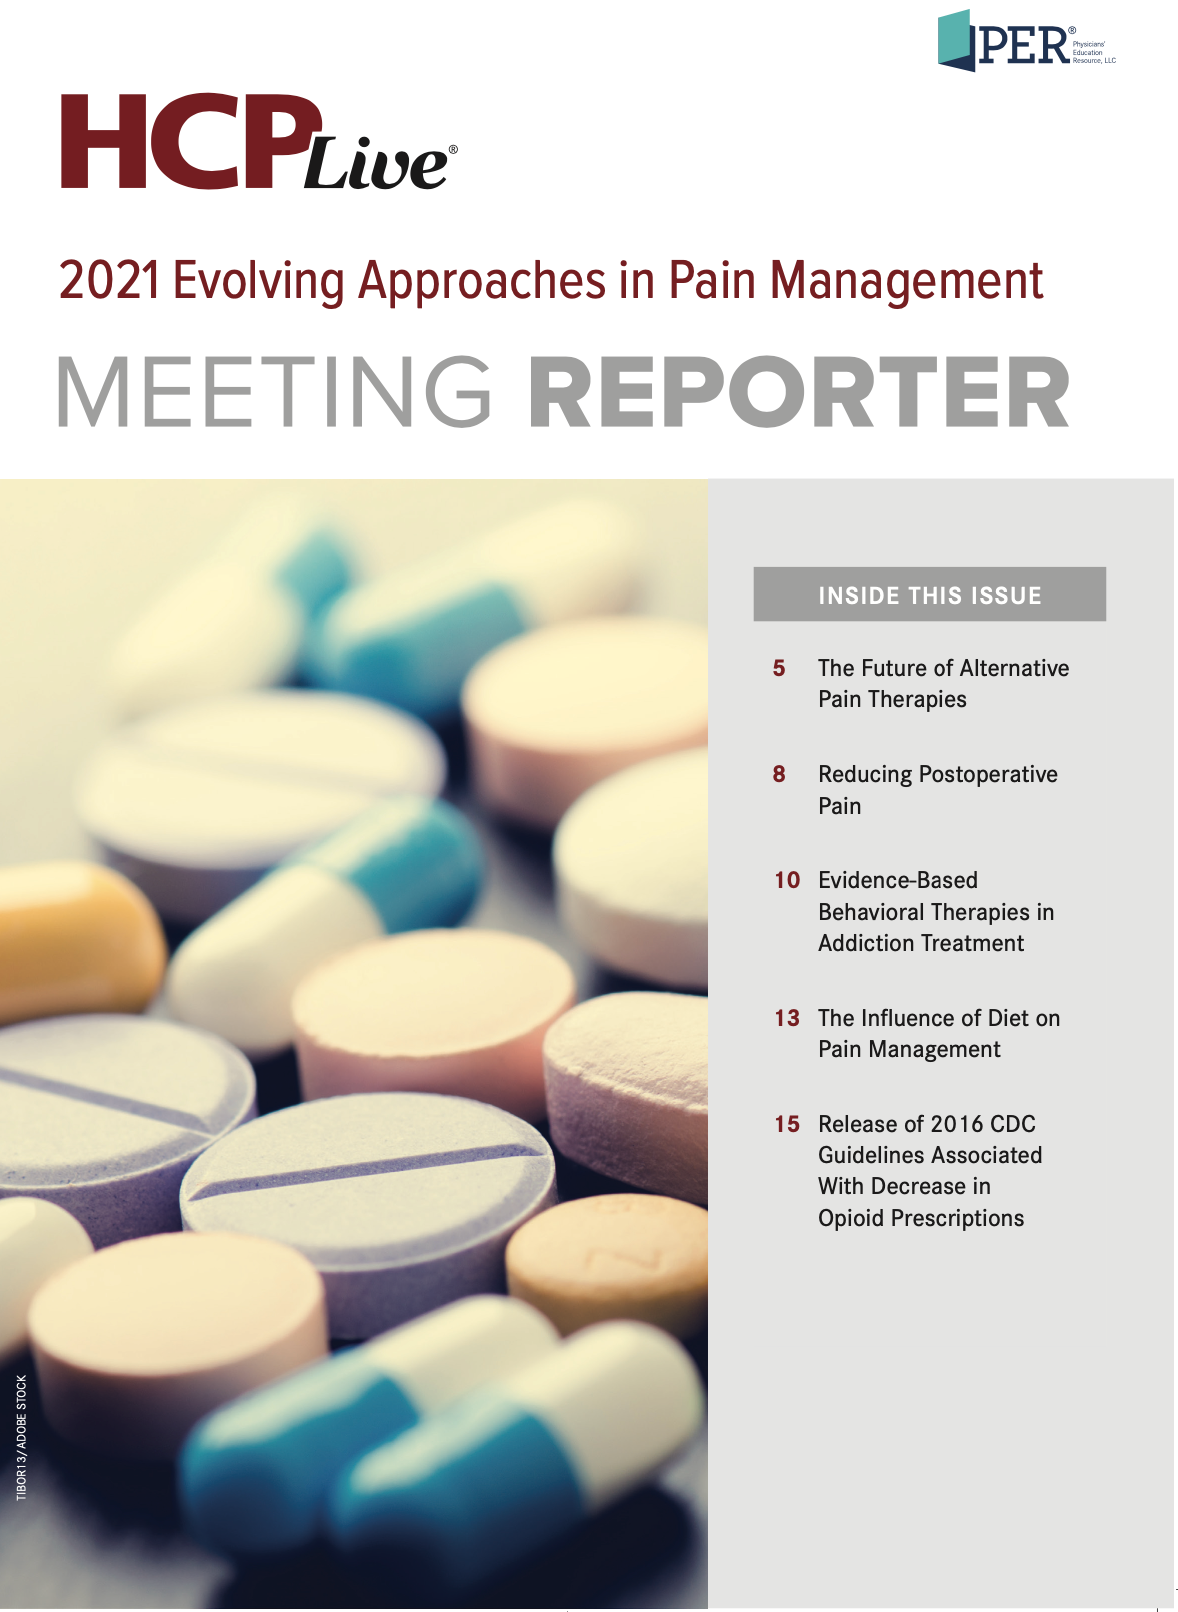 Evolving Approaches in Pain Management